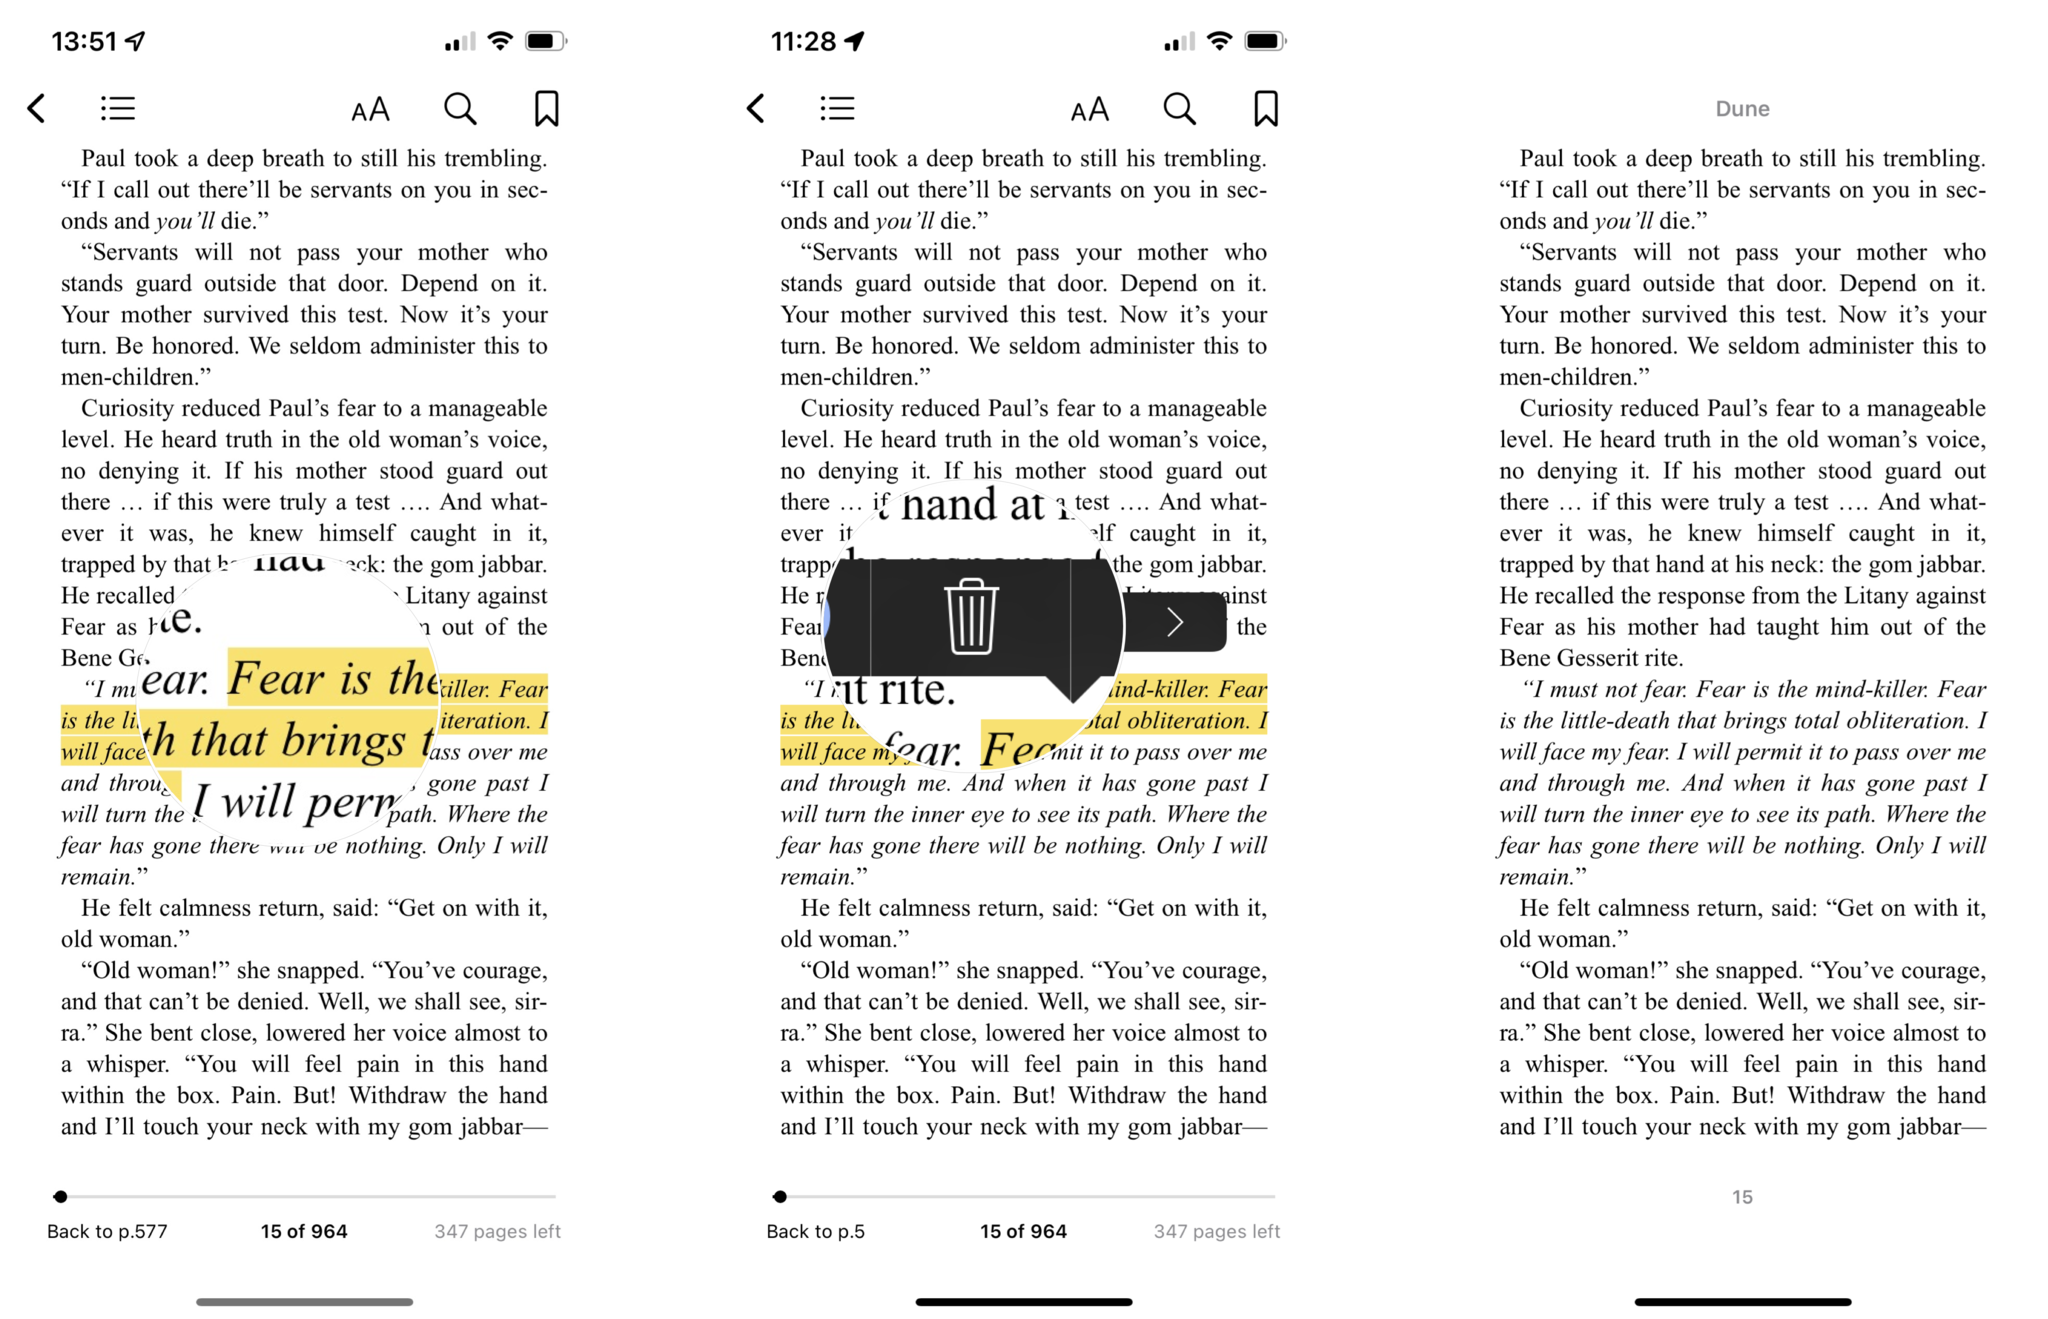 How to remove a highlight in Apple Books: Tap the highlighted text, tap the trash icon